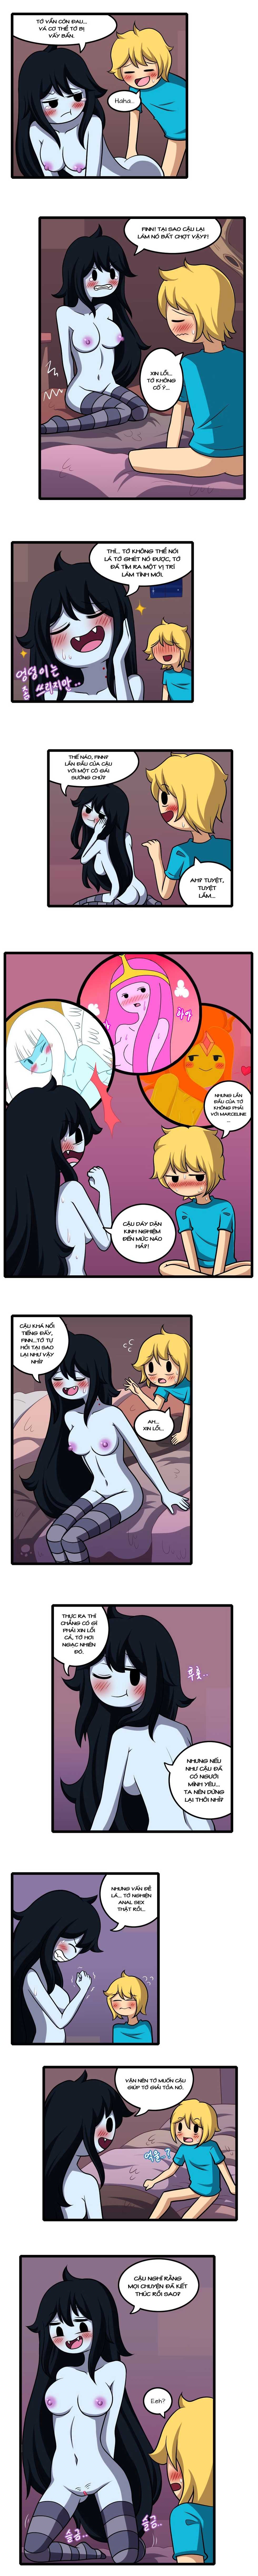 [WB] Adult Time 4 (Adventure Time) [Vietnamese Tiếng Việt] [Demon Victory Team] - Page 18